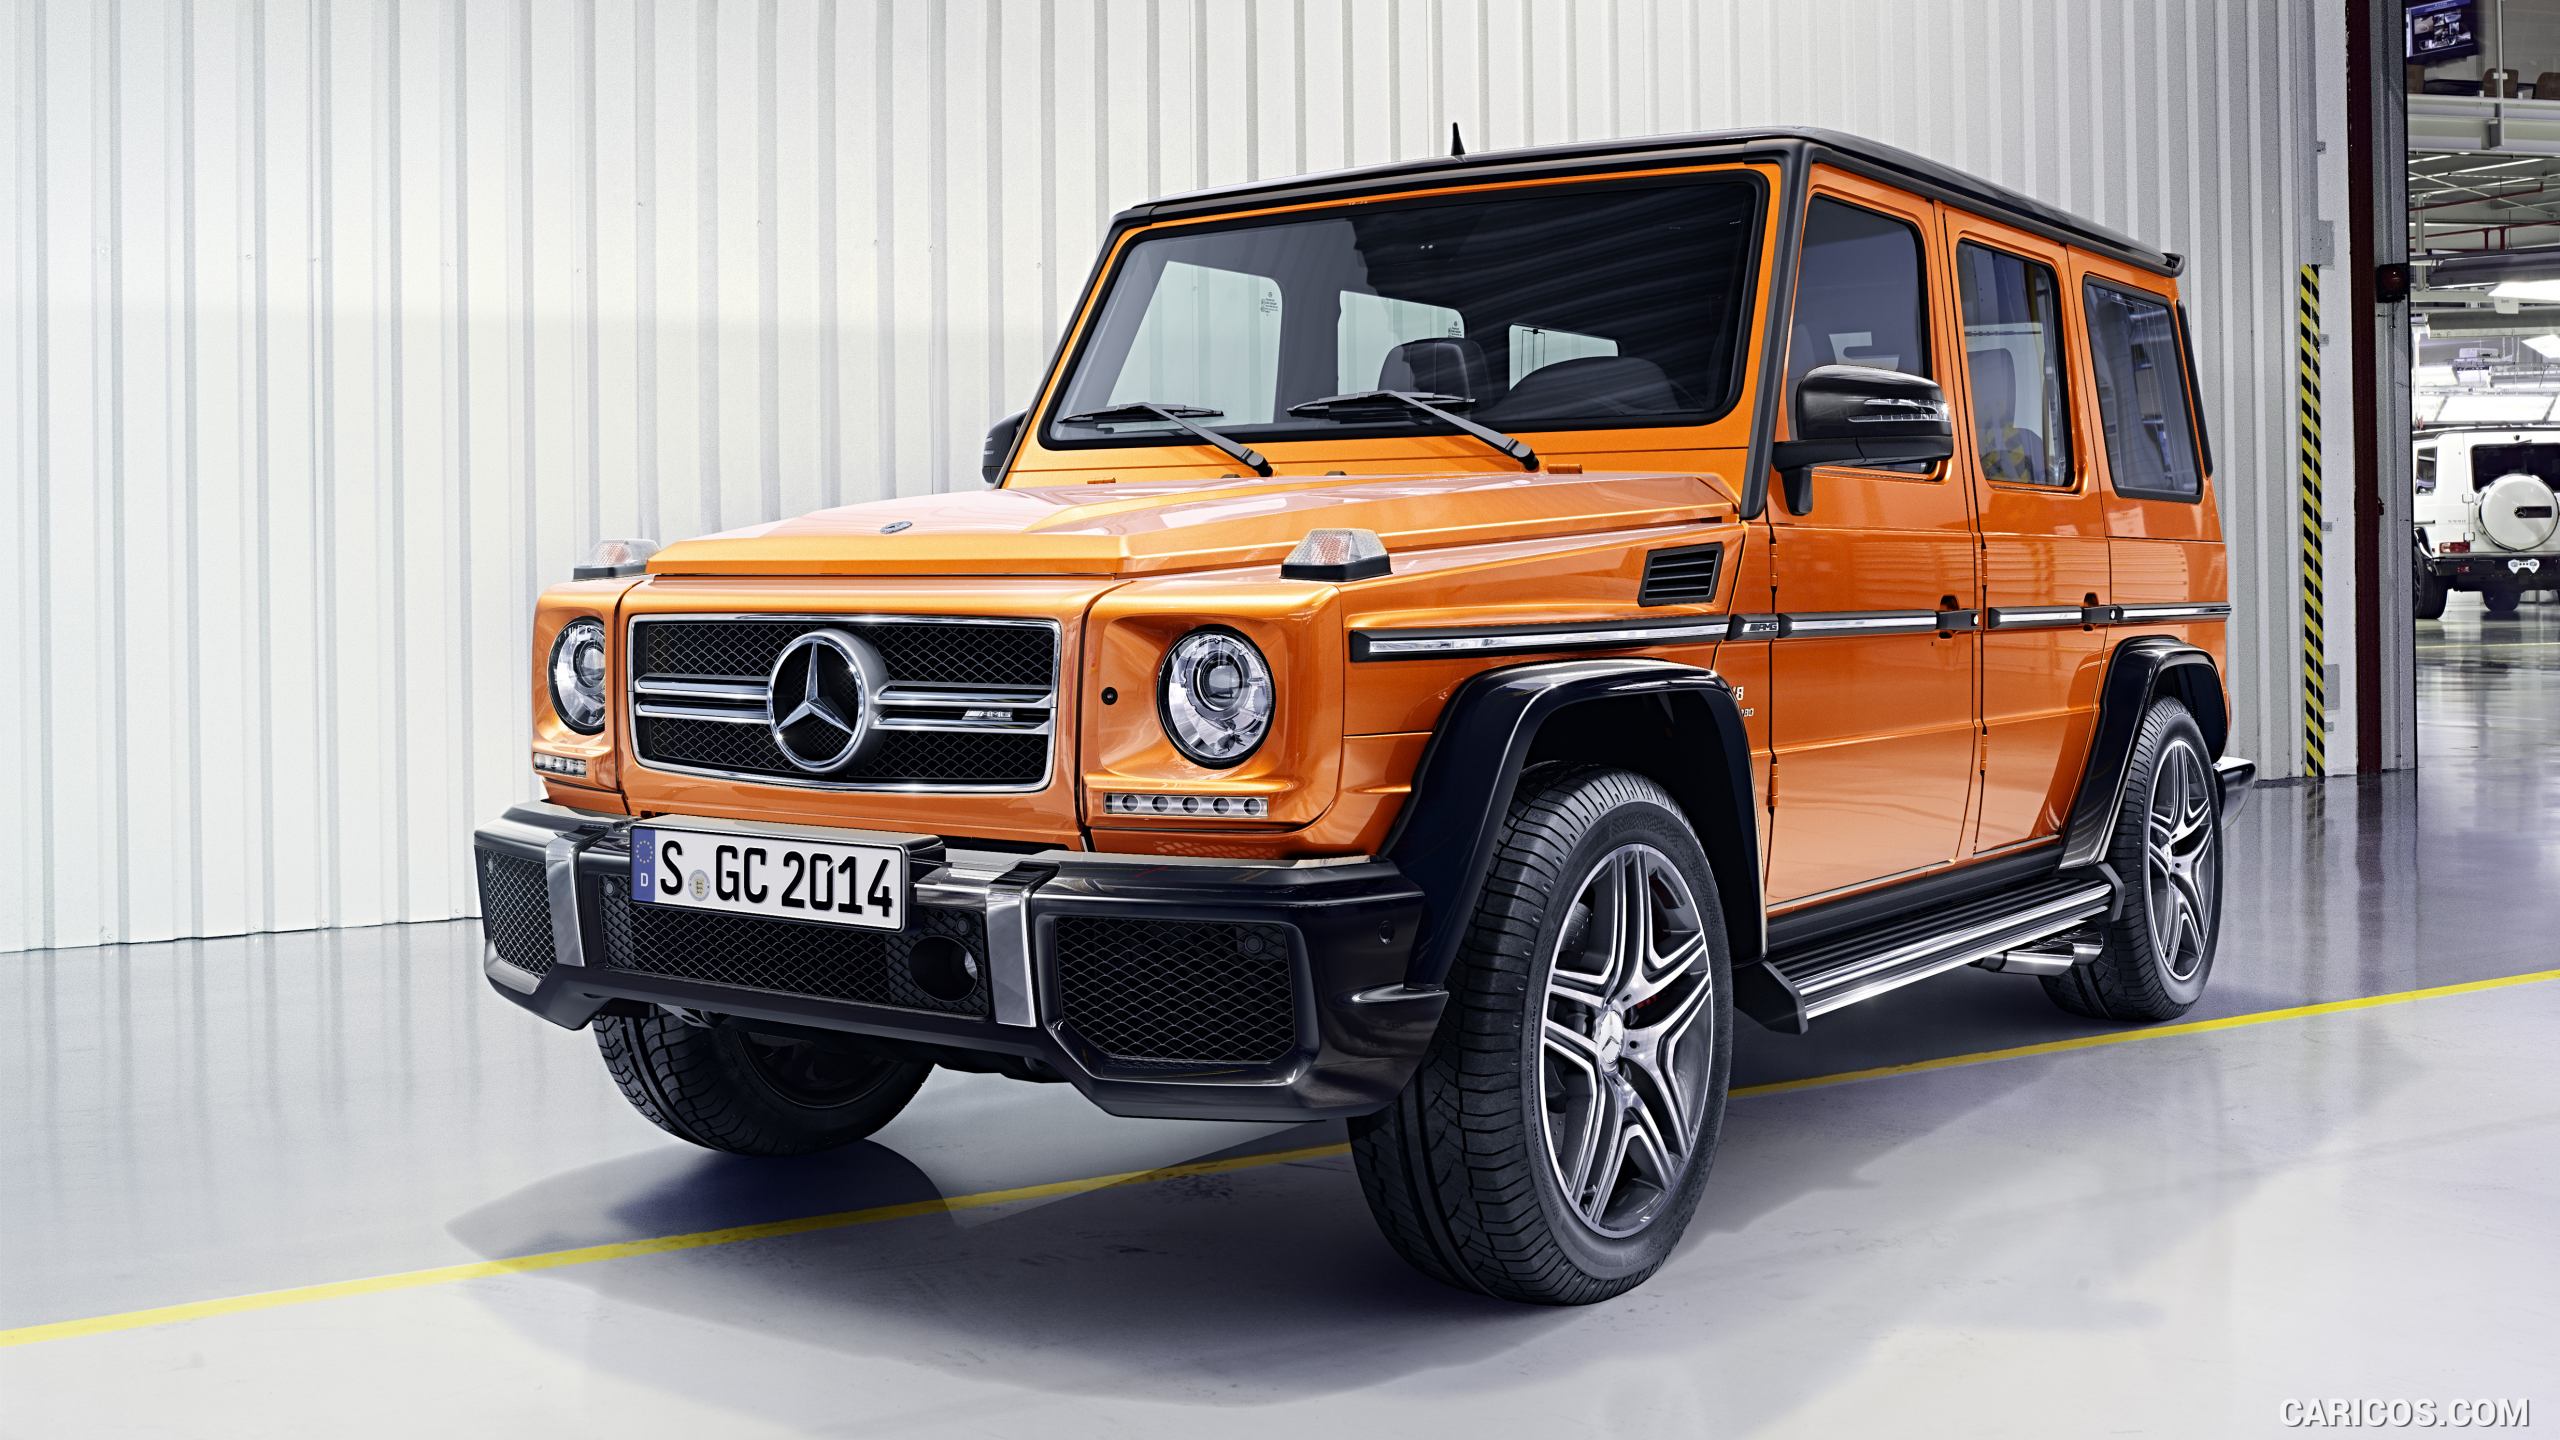 2016 Mercedes-AMG G63 (Sunset Beam) - Front, #7 of 48